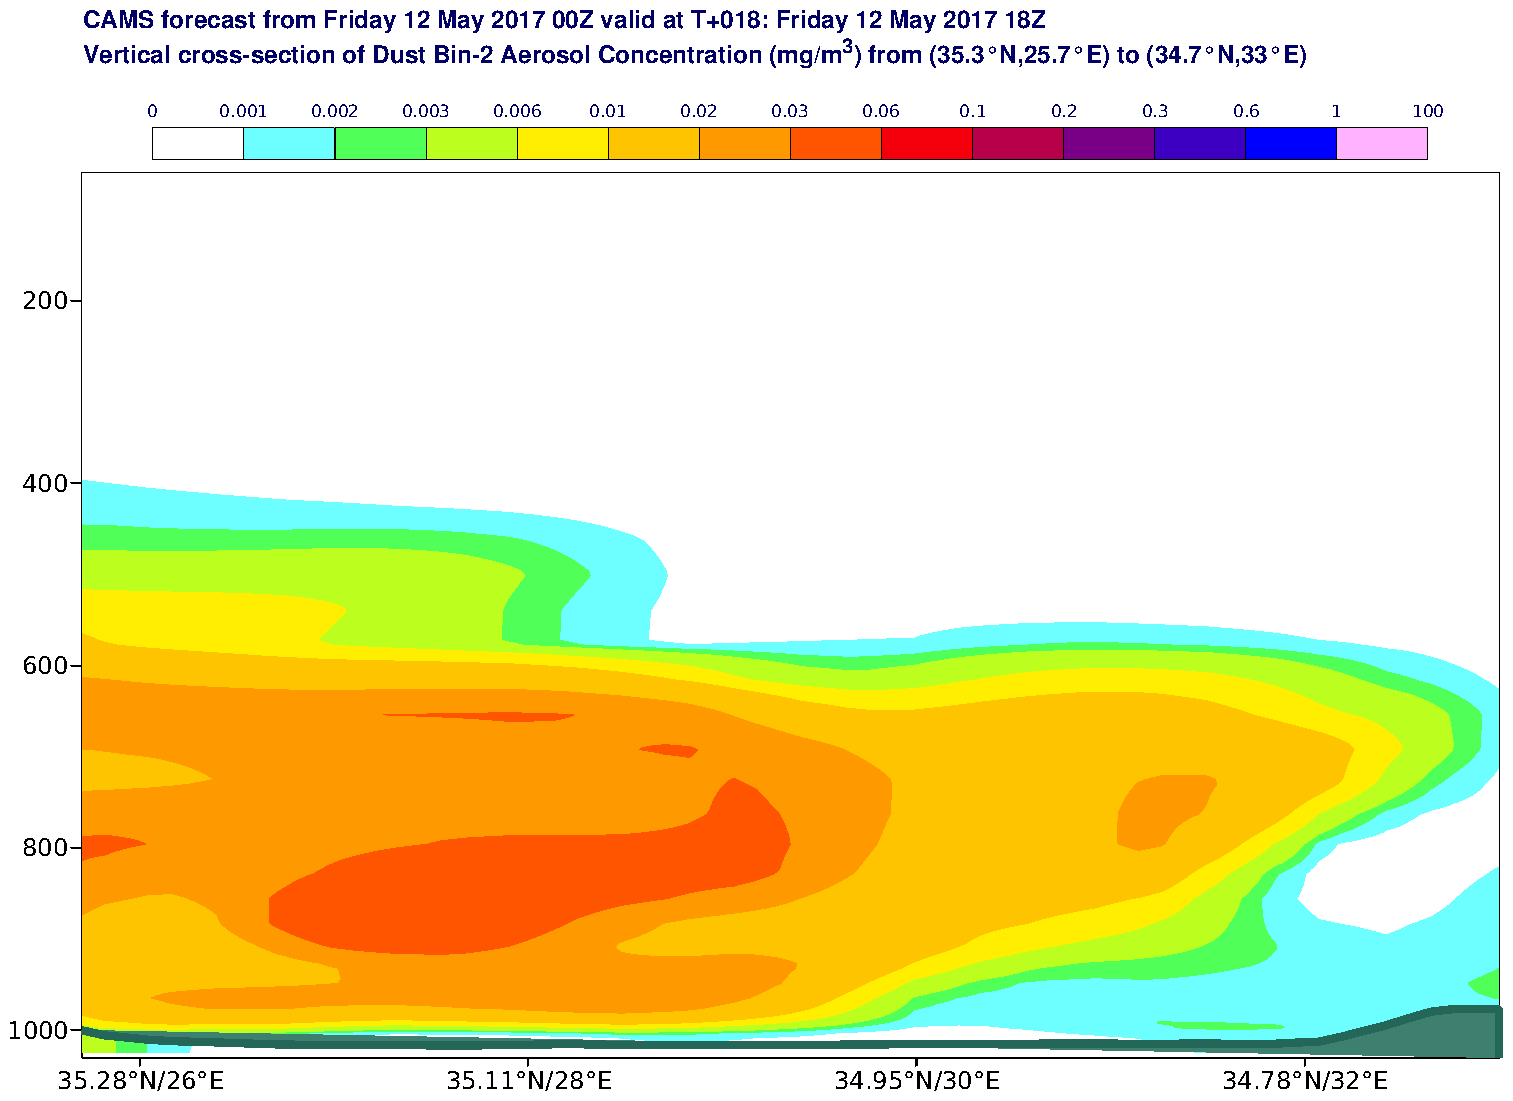 Vertical cross-section of Dust Bin-2 Aerosol Concentration (mg/m3) valid at T18 - 2017-05-12 18:00